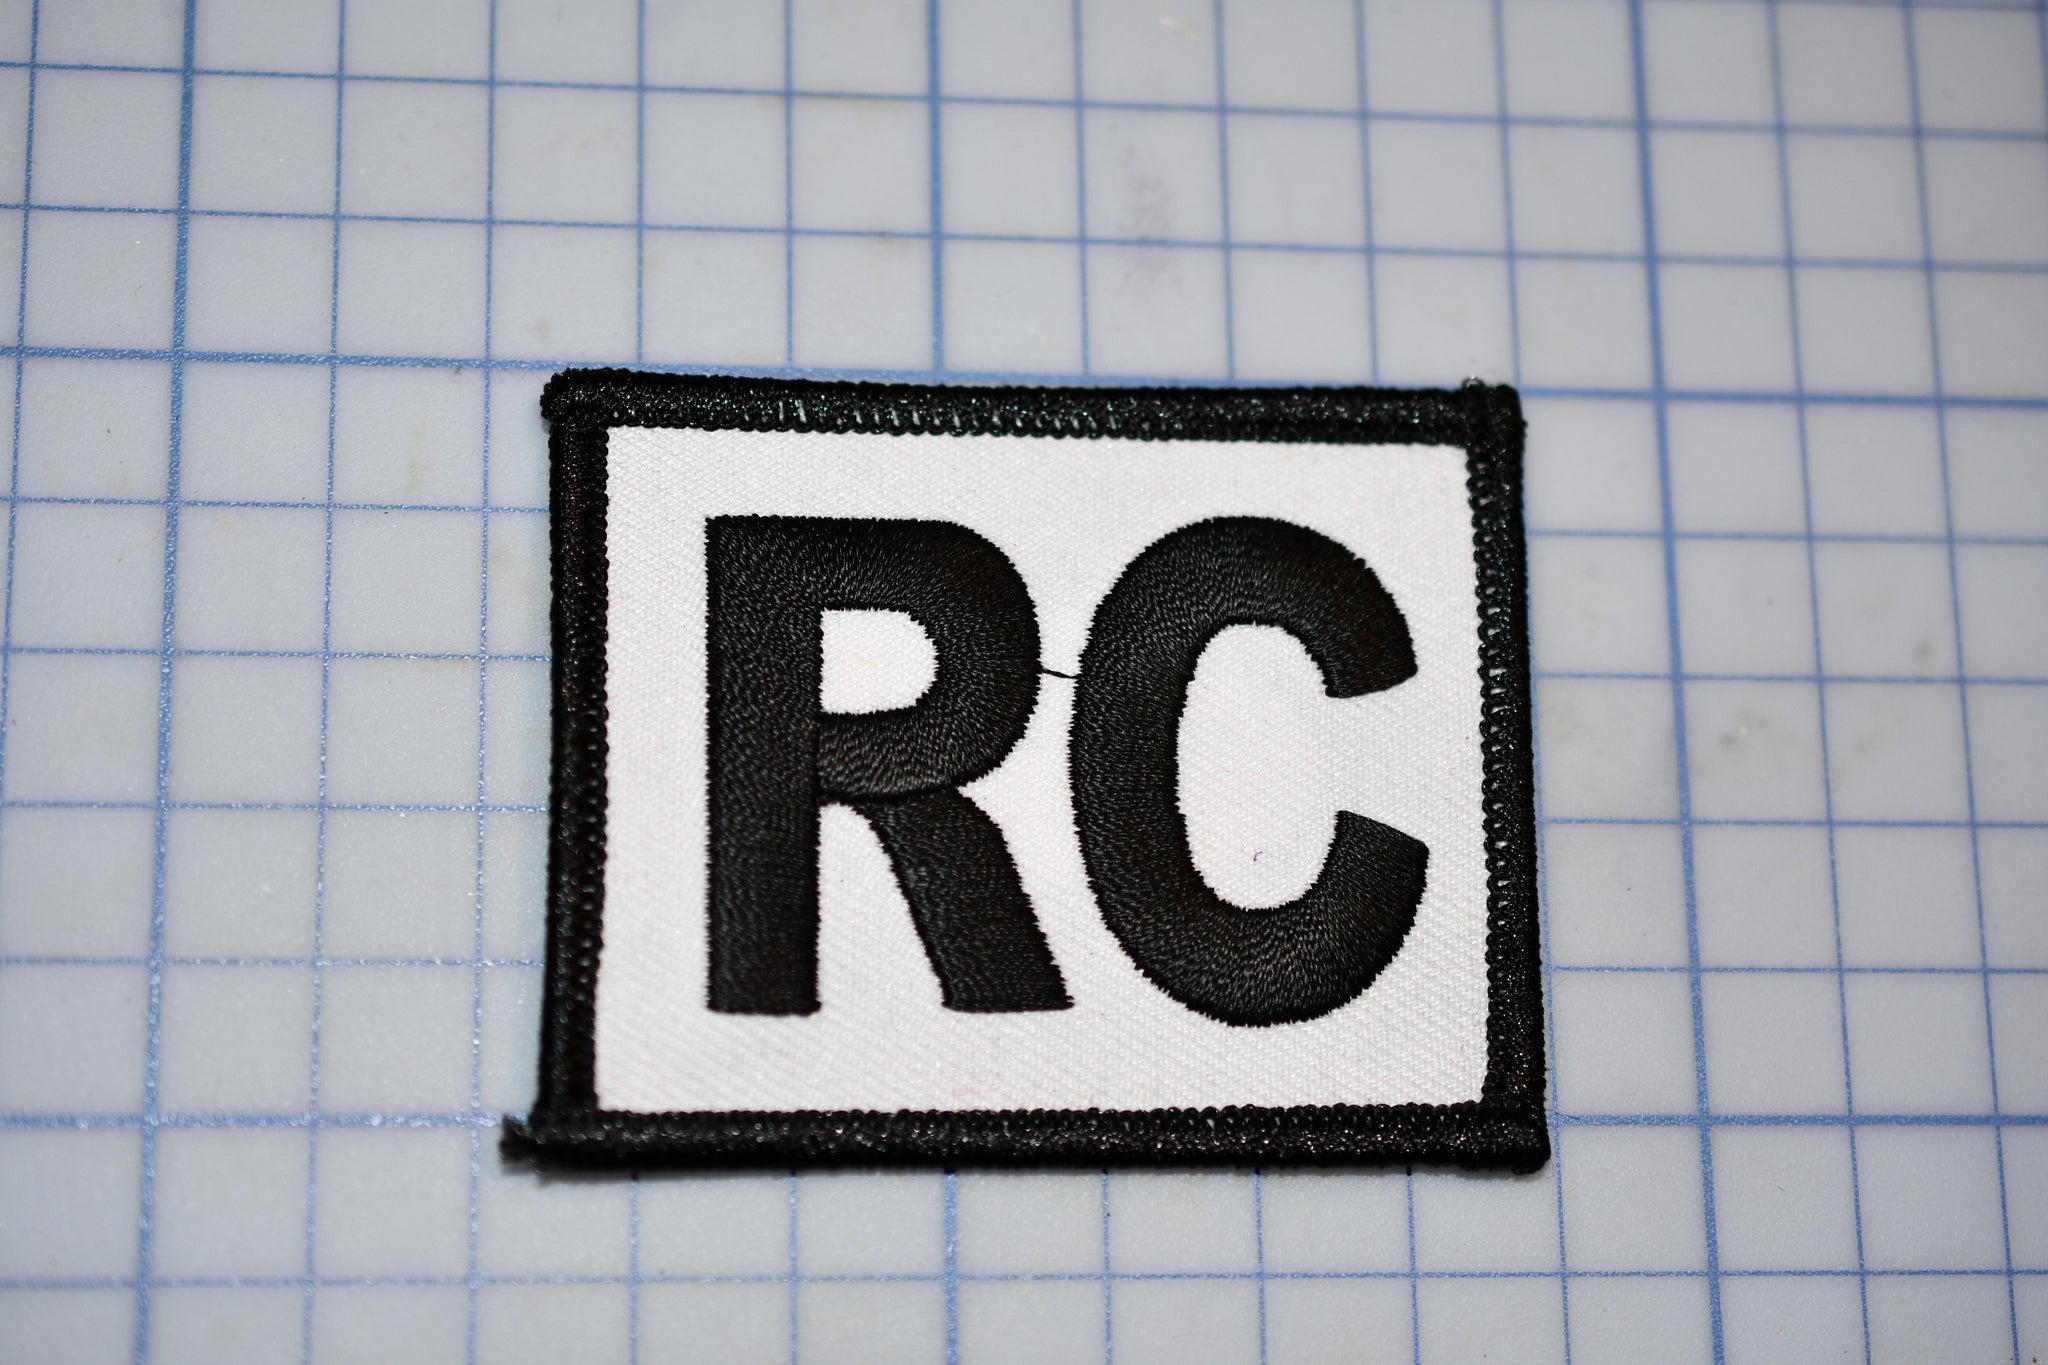 a black and white patch with the letter rc on it